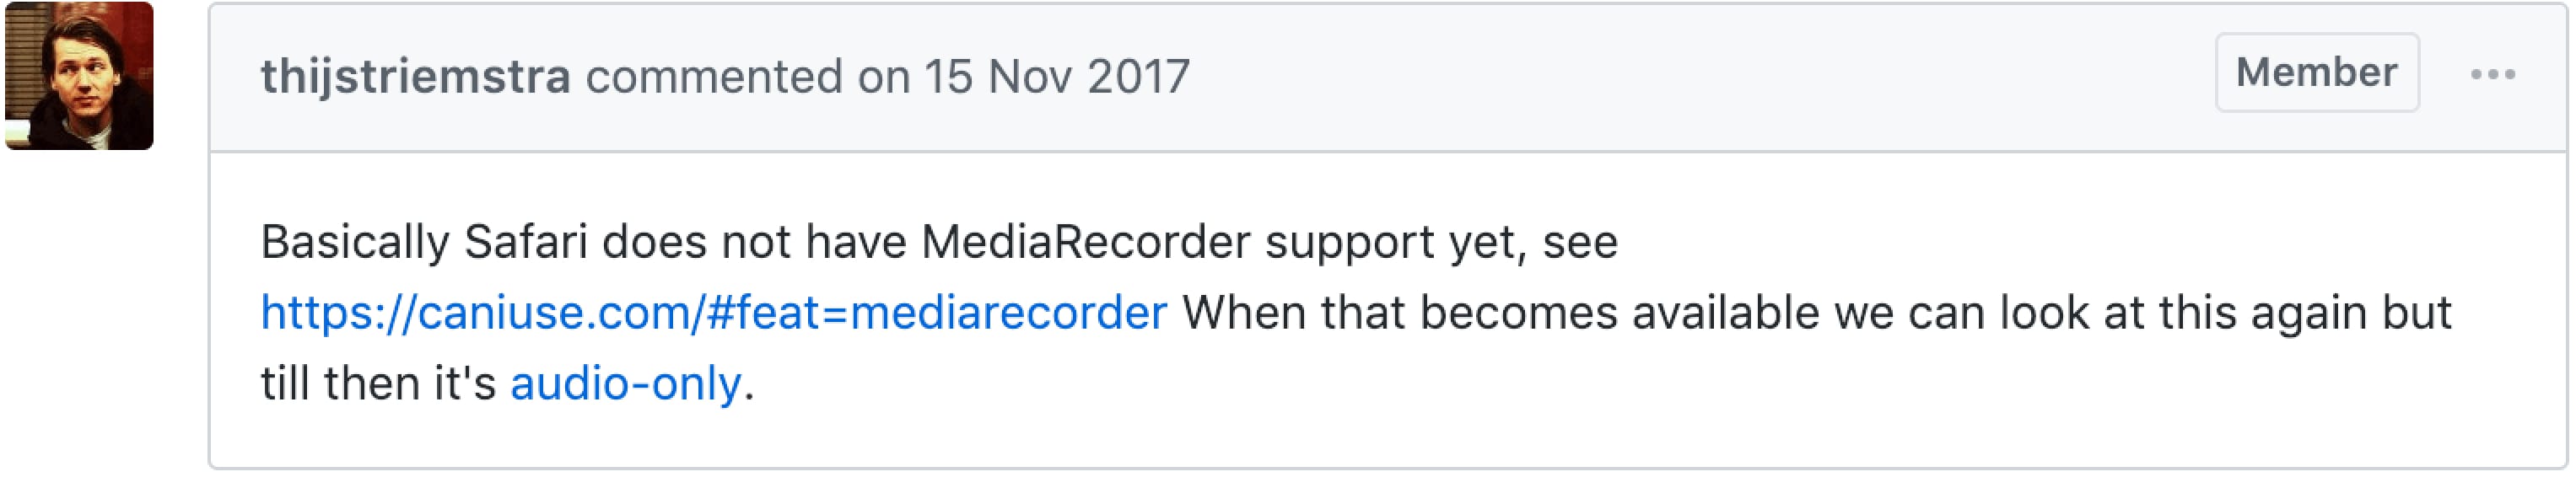 Github member quote: 'Basically Safari does not have MediaRecorder support yet, see link to caniuse.com. When that becomes available we can look at this again, but till then it's audio only.'